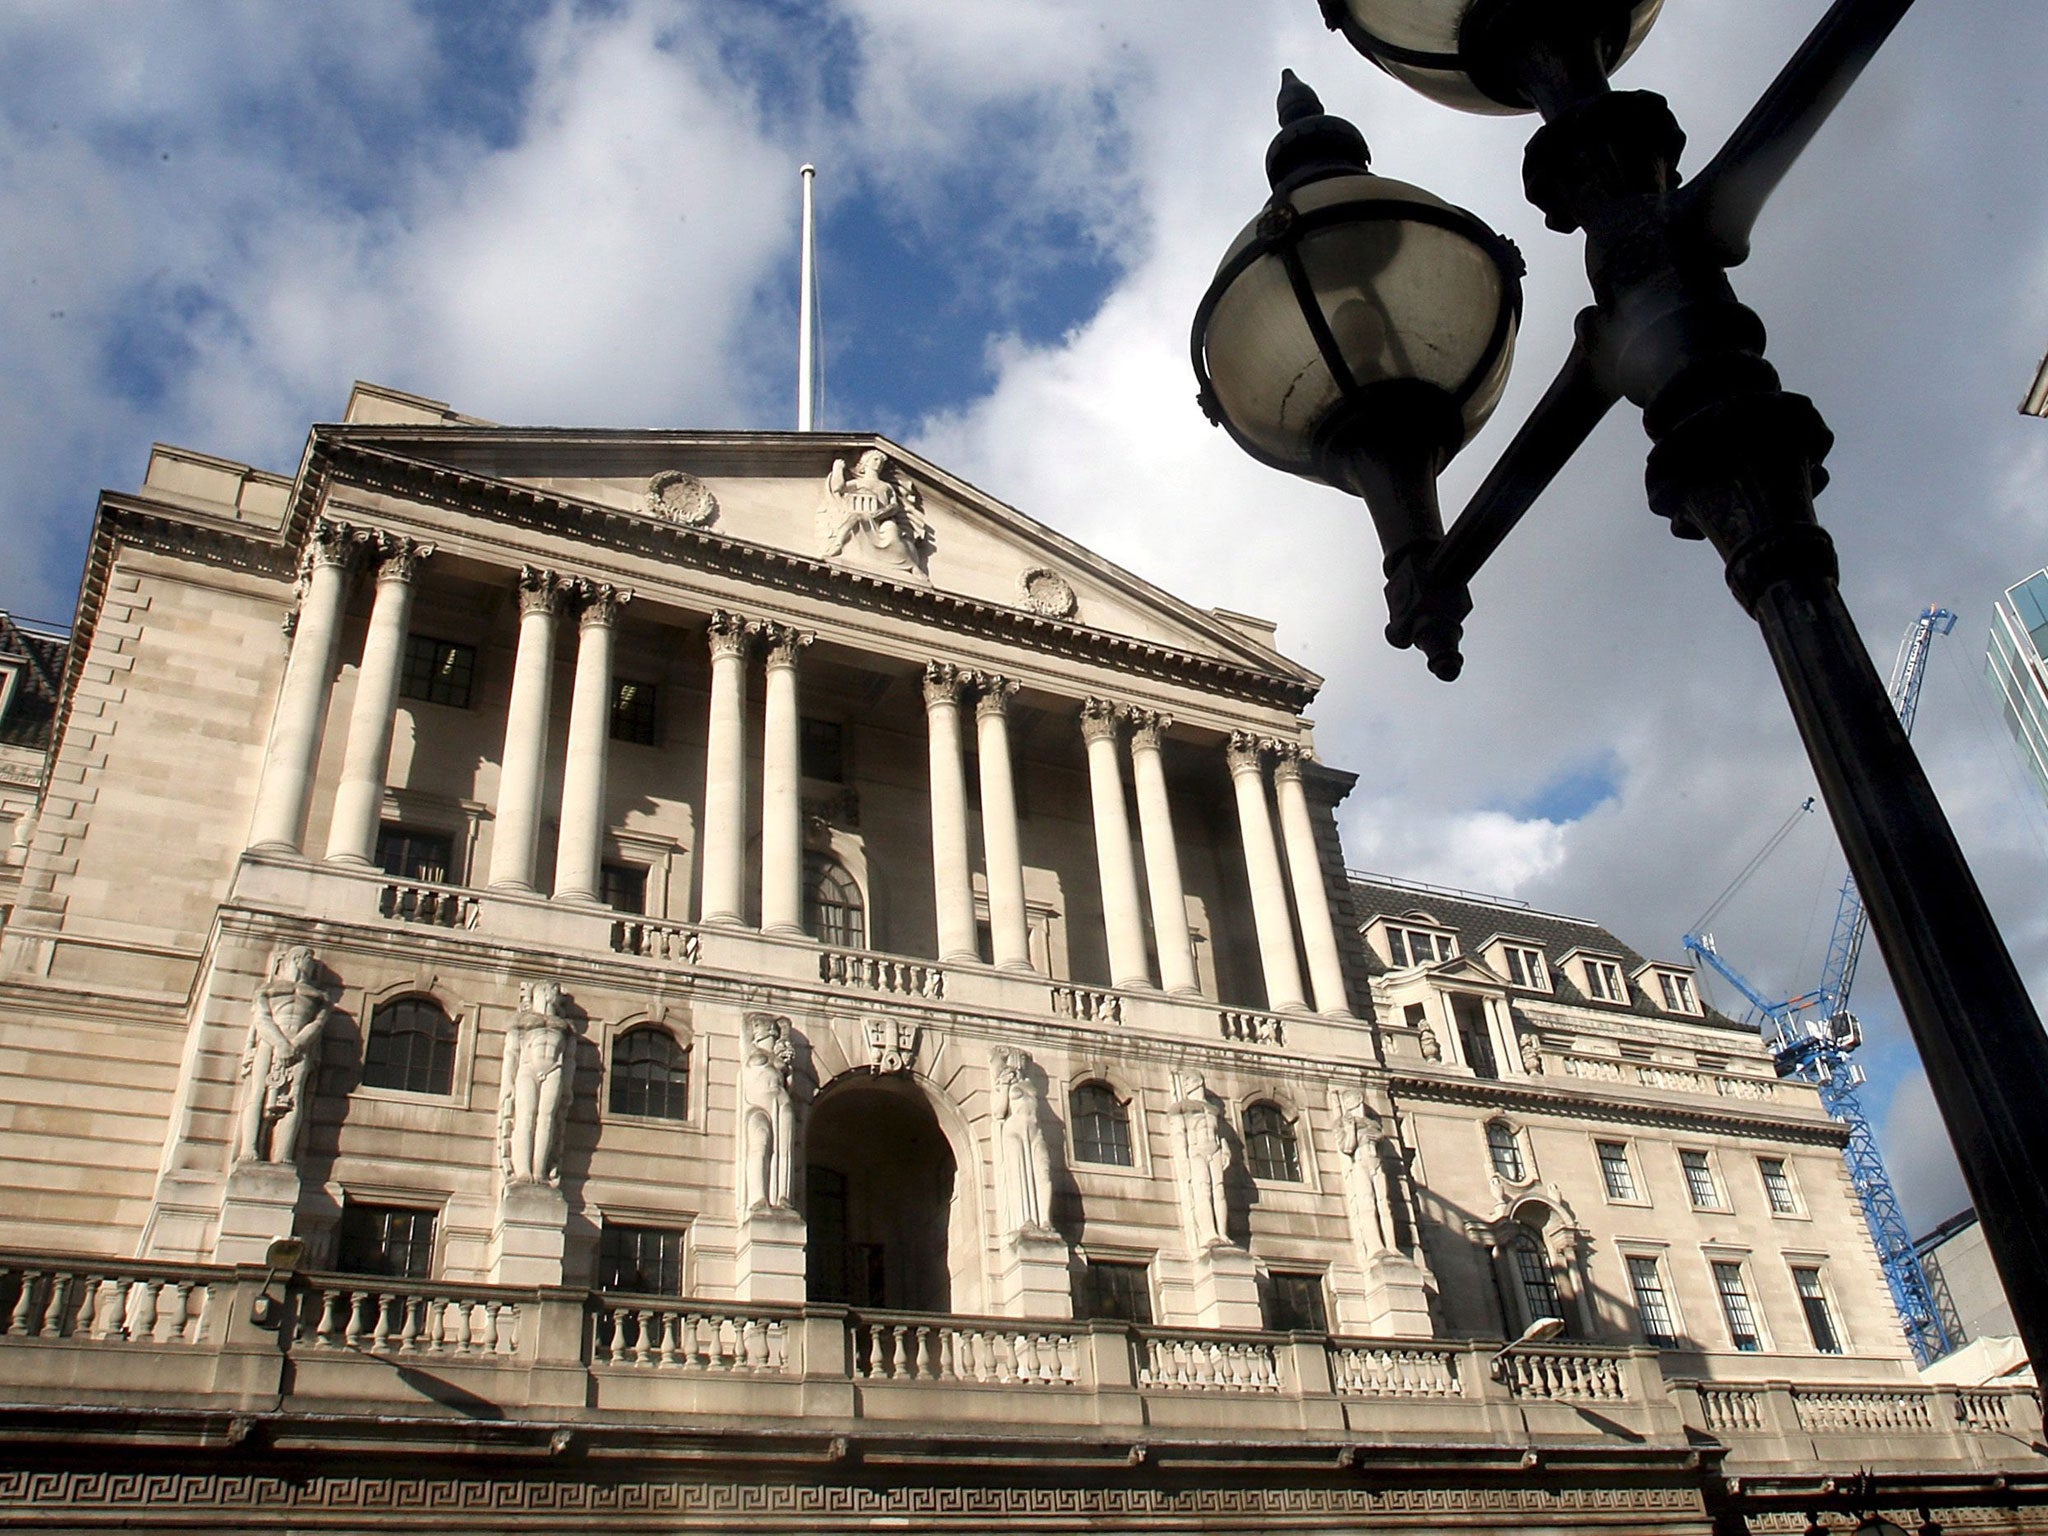 The Bank of England must be given legal authority to break up banks that misbehave, the Chancellor has been told